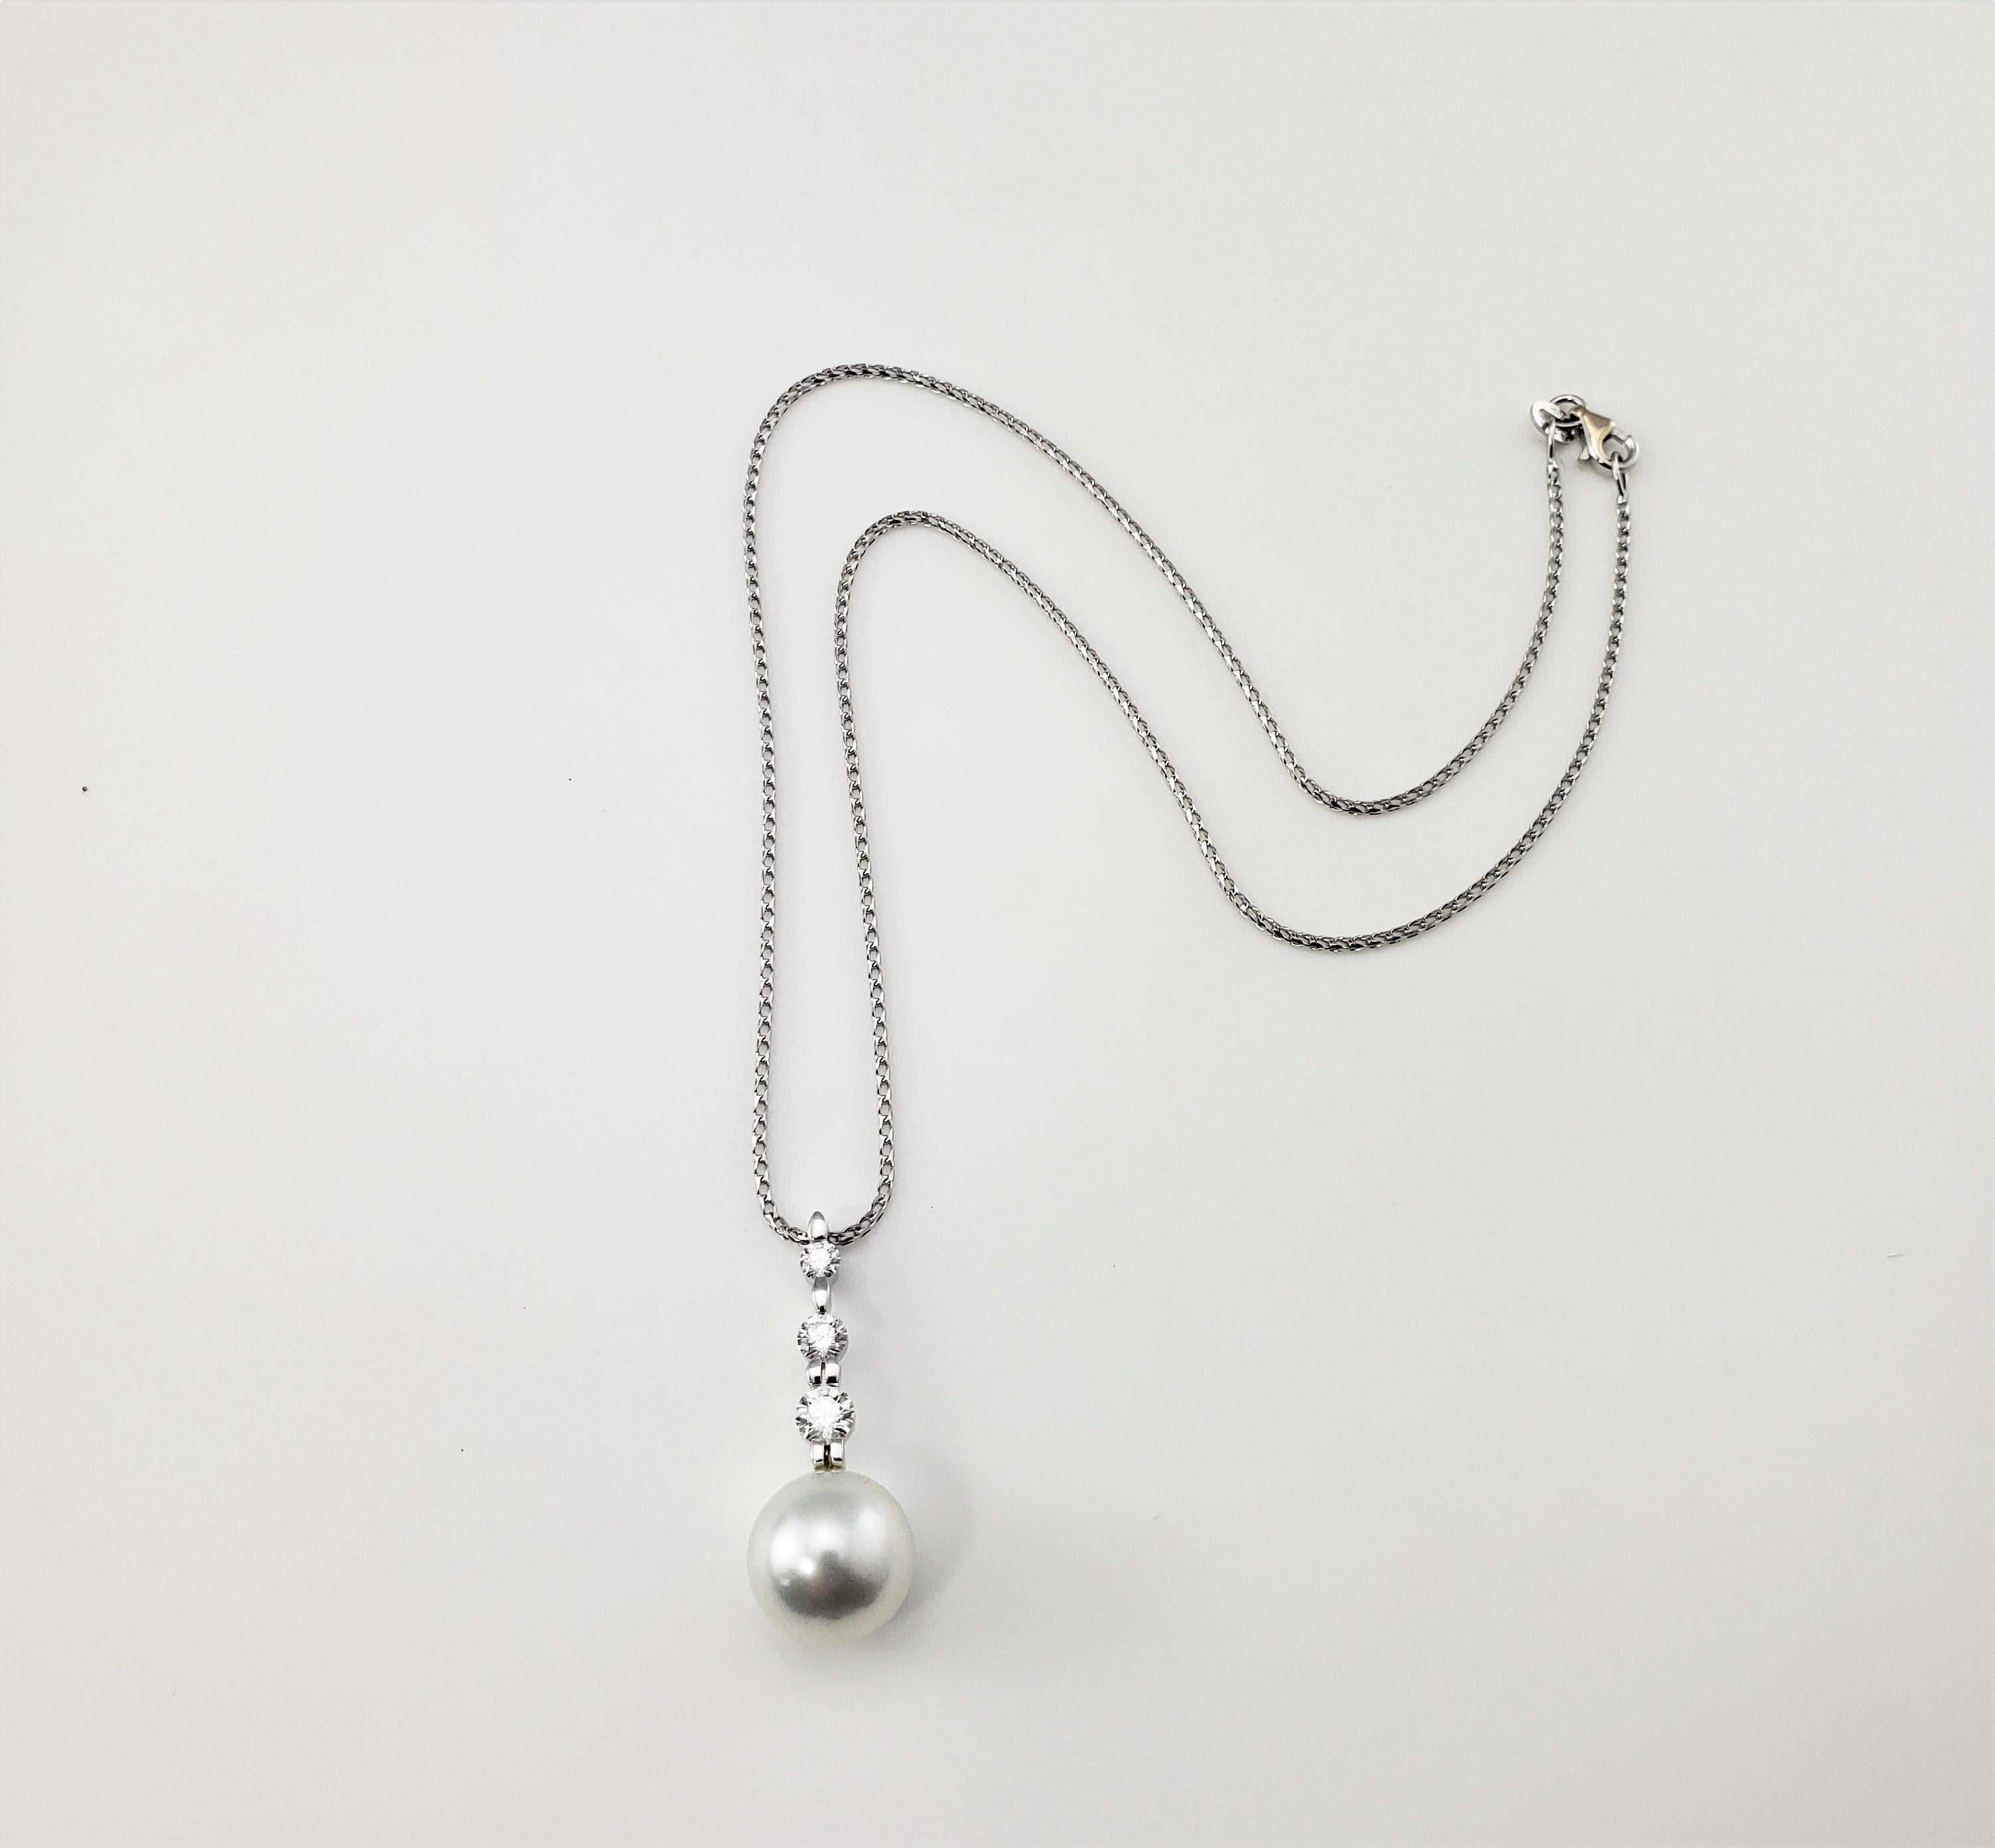 18 Karat White Gold Pearl and Diamond Pendant Necklace-

This stunning pendant features one 12 mm pearl and three round brilliant cut diamonds set in classic 14K white gold.  Suspends from an elegant white gold necklace.

Approximate total diamond